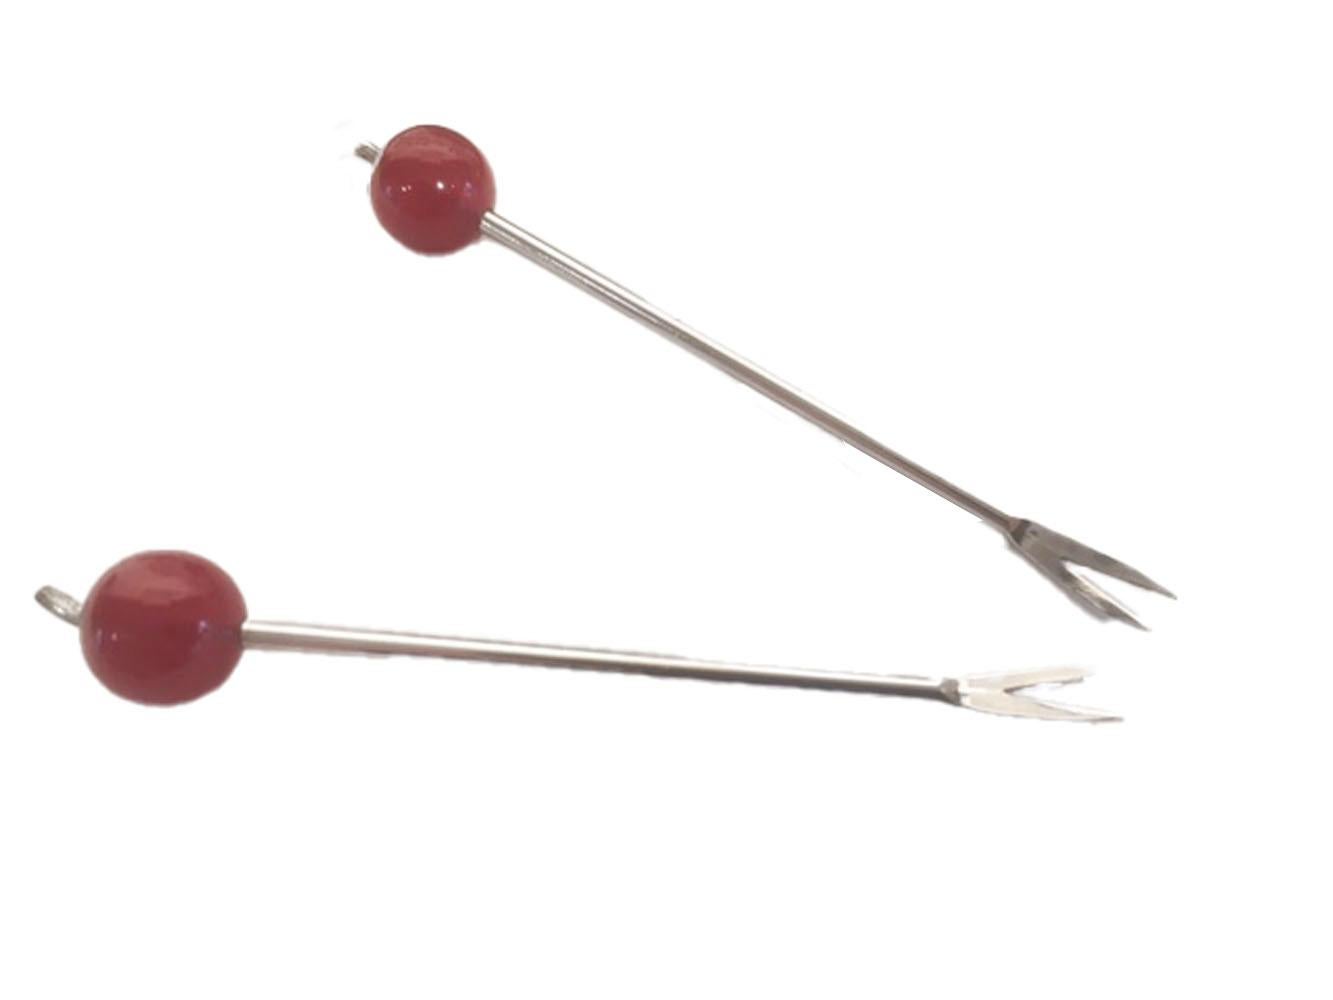 12 Art Deco Cocktail Picks with Cherry Red Tops in a Chrome Fan-Form Stand In Good Condition For Sale In Nantucket, MA